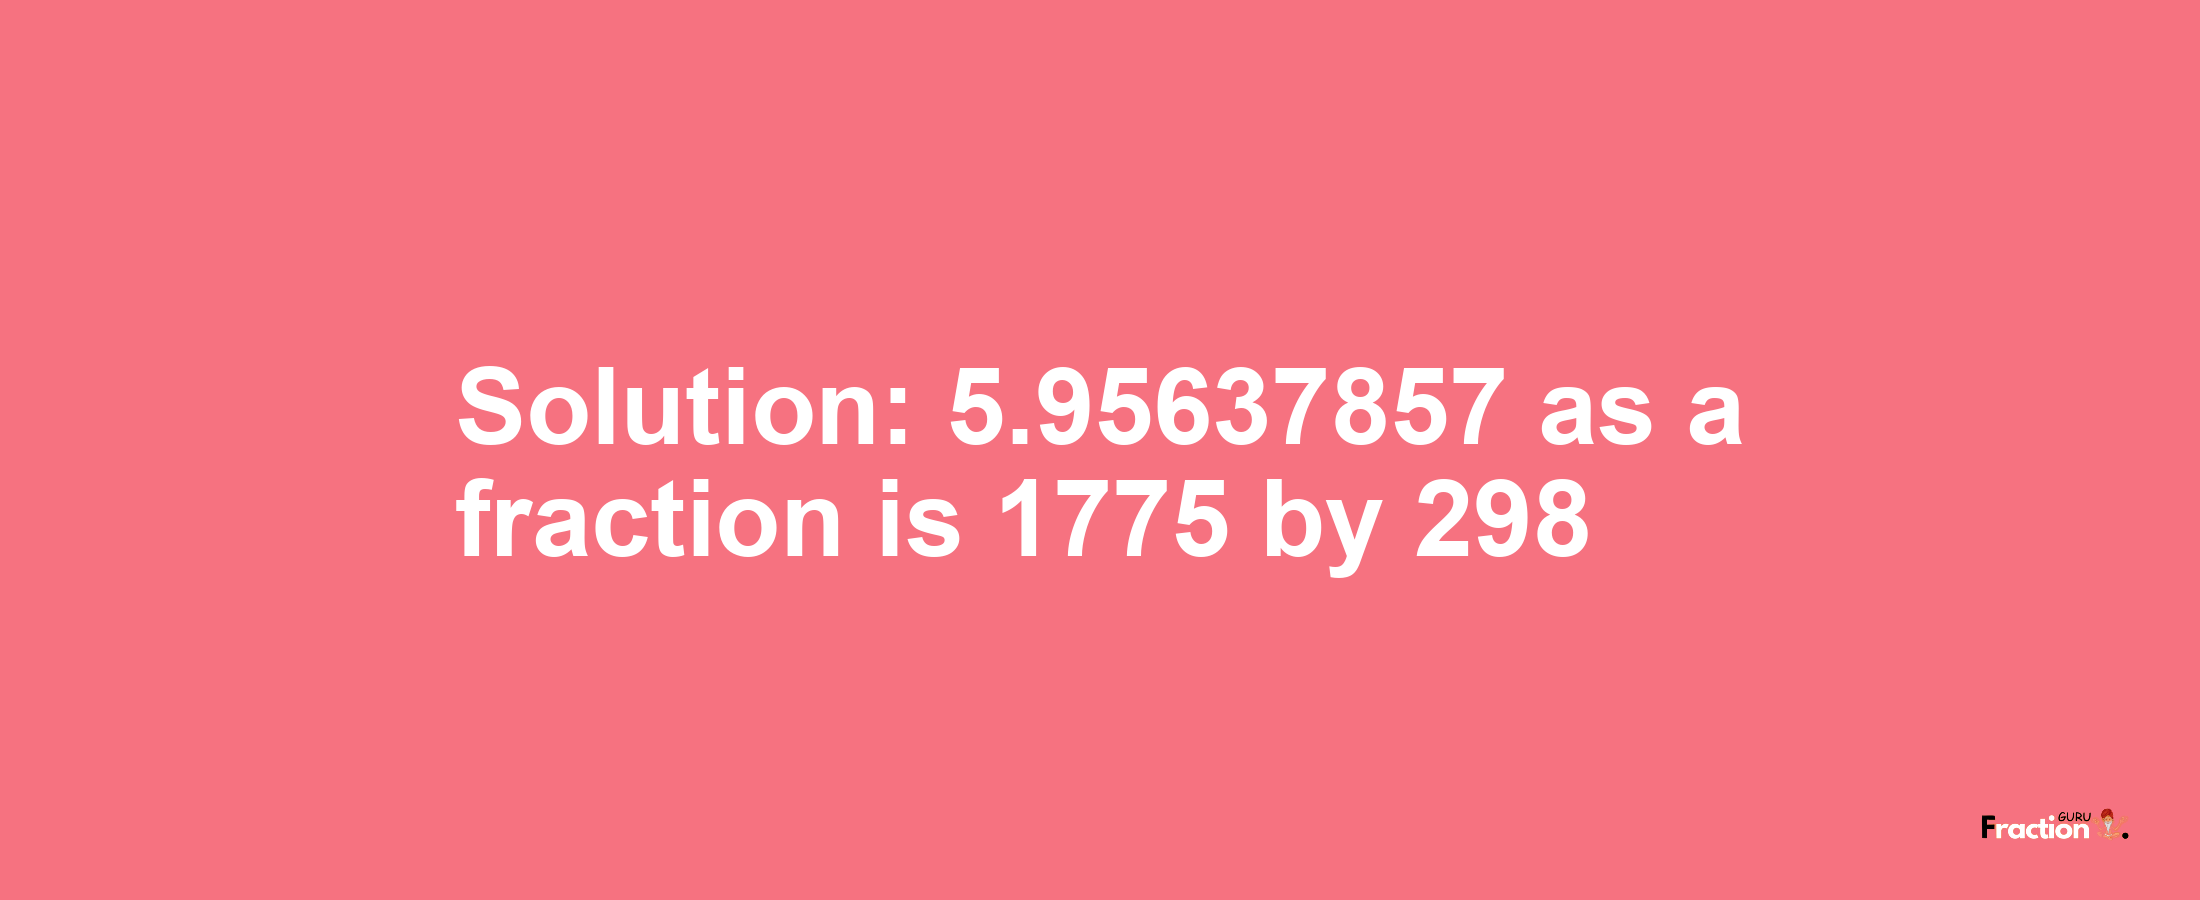 Solution:5.95637857 as a fraction is 1775/298